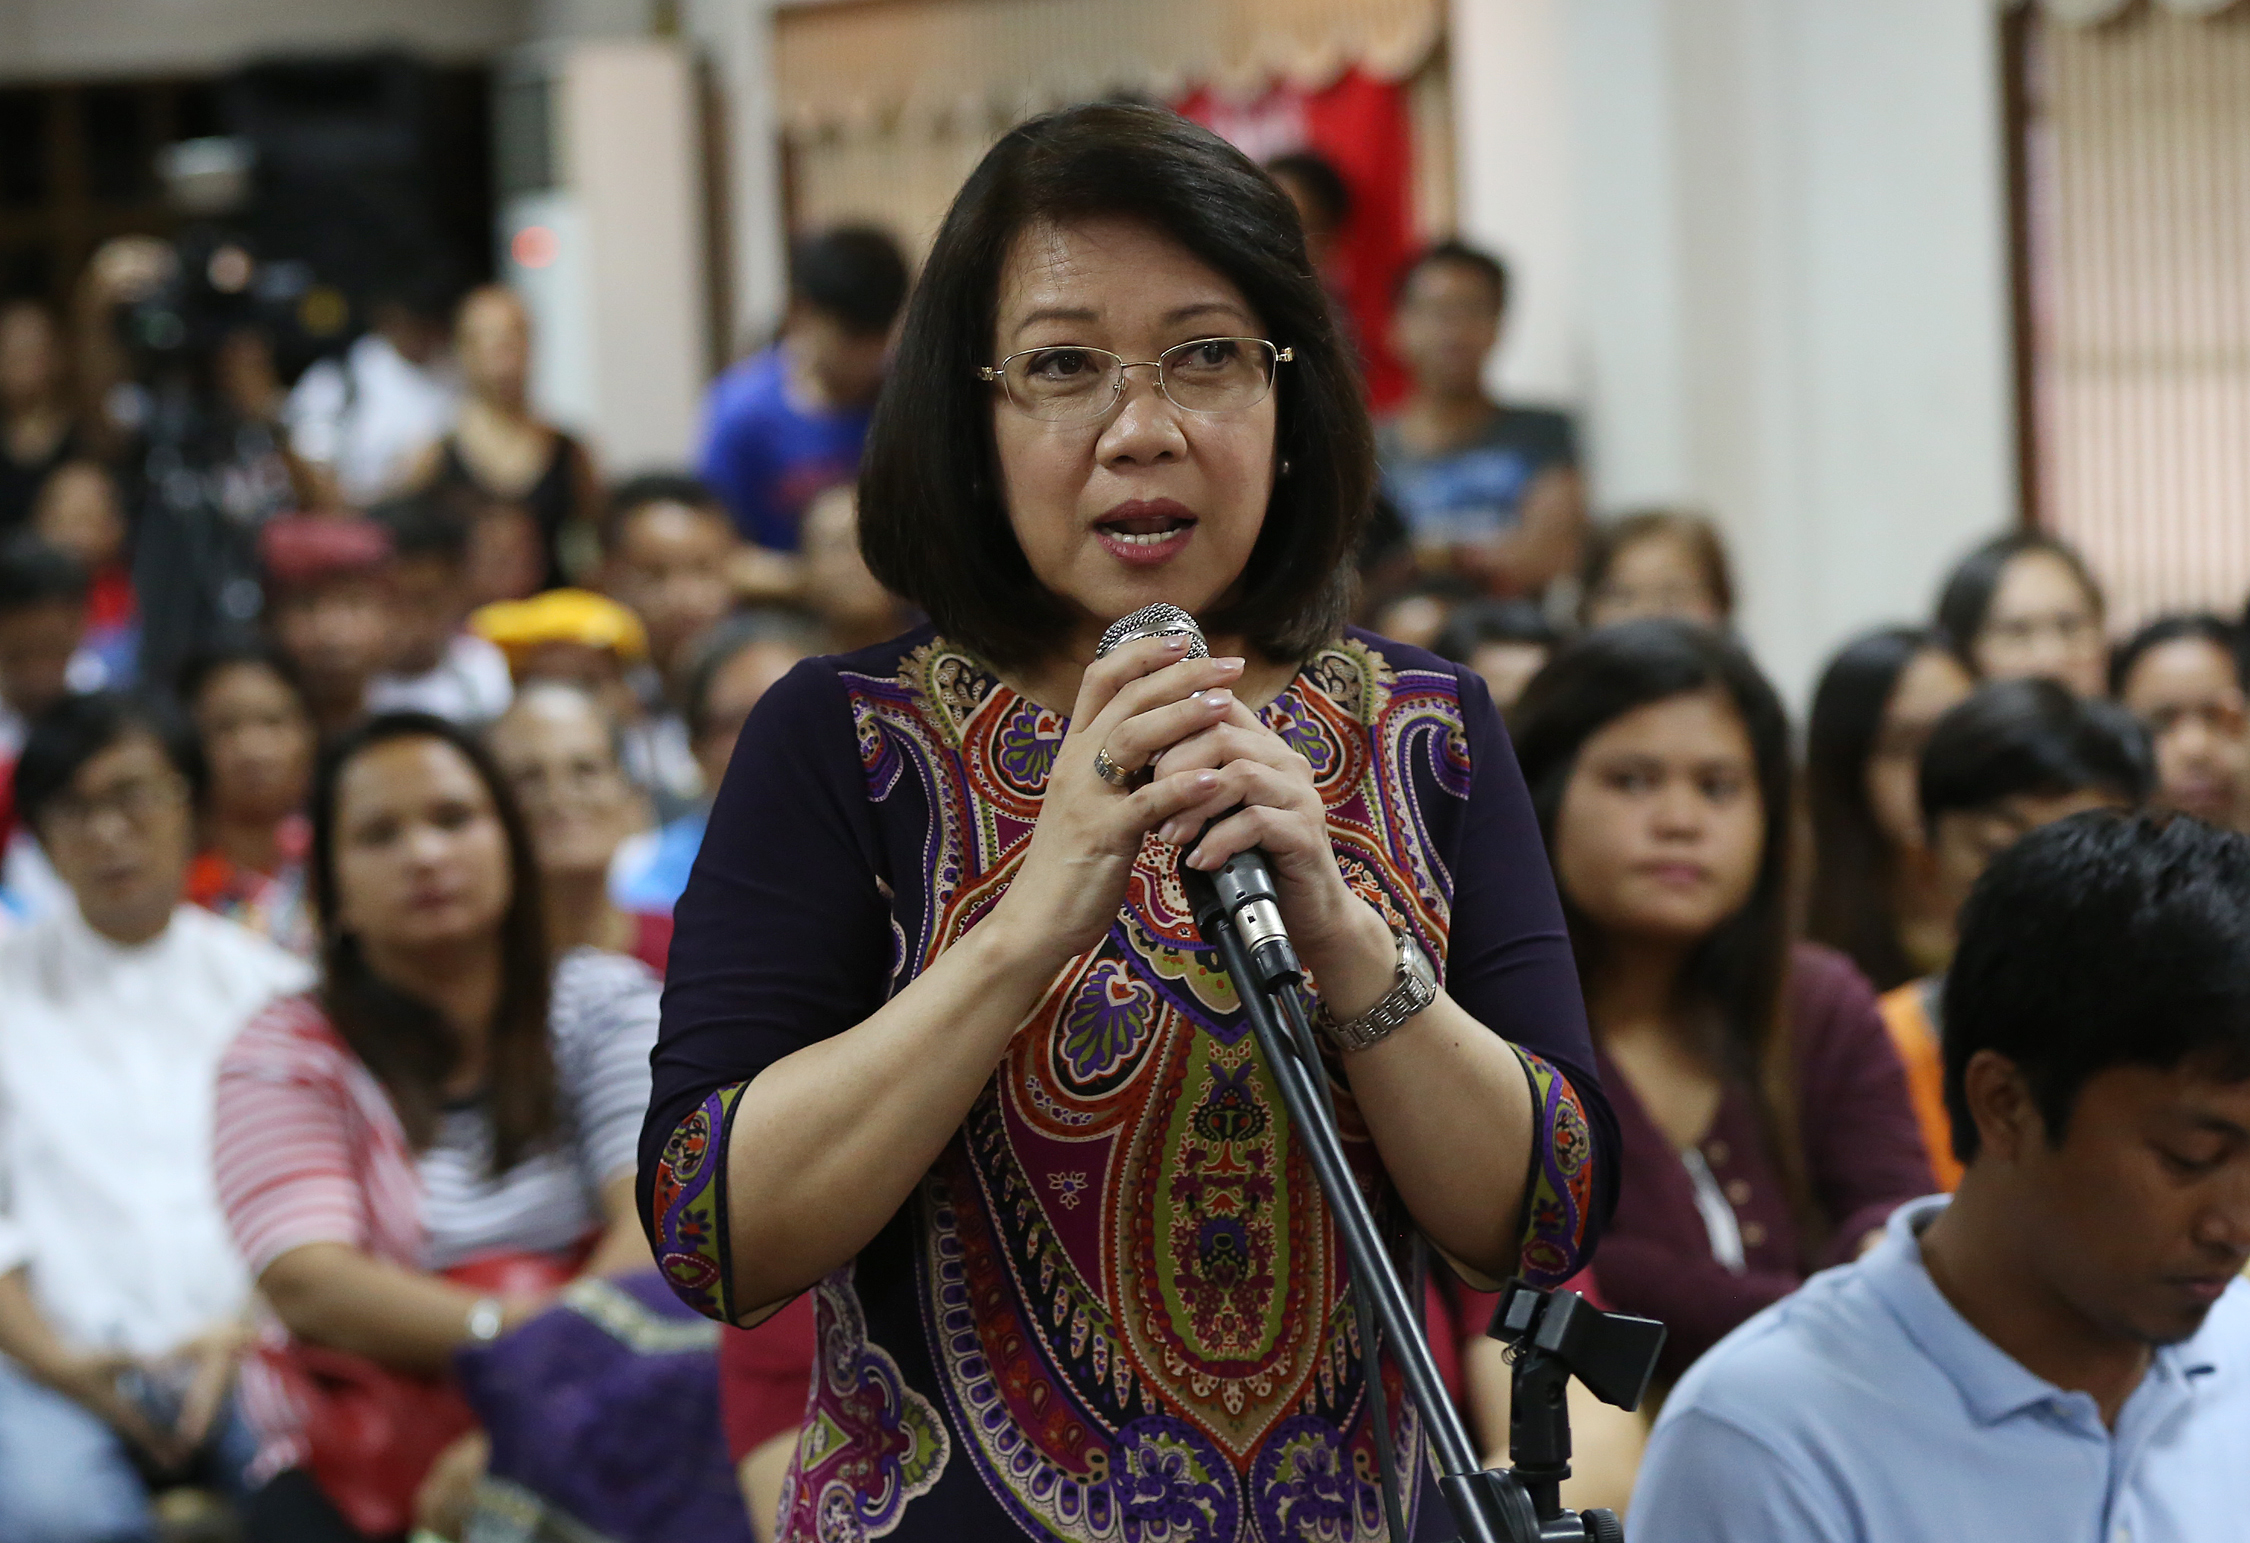 Sereno takes on role as voice of the voiceless